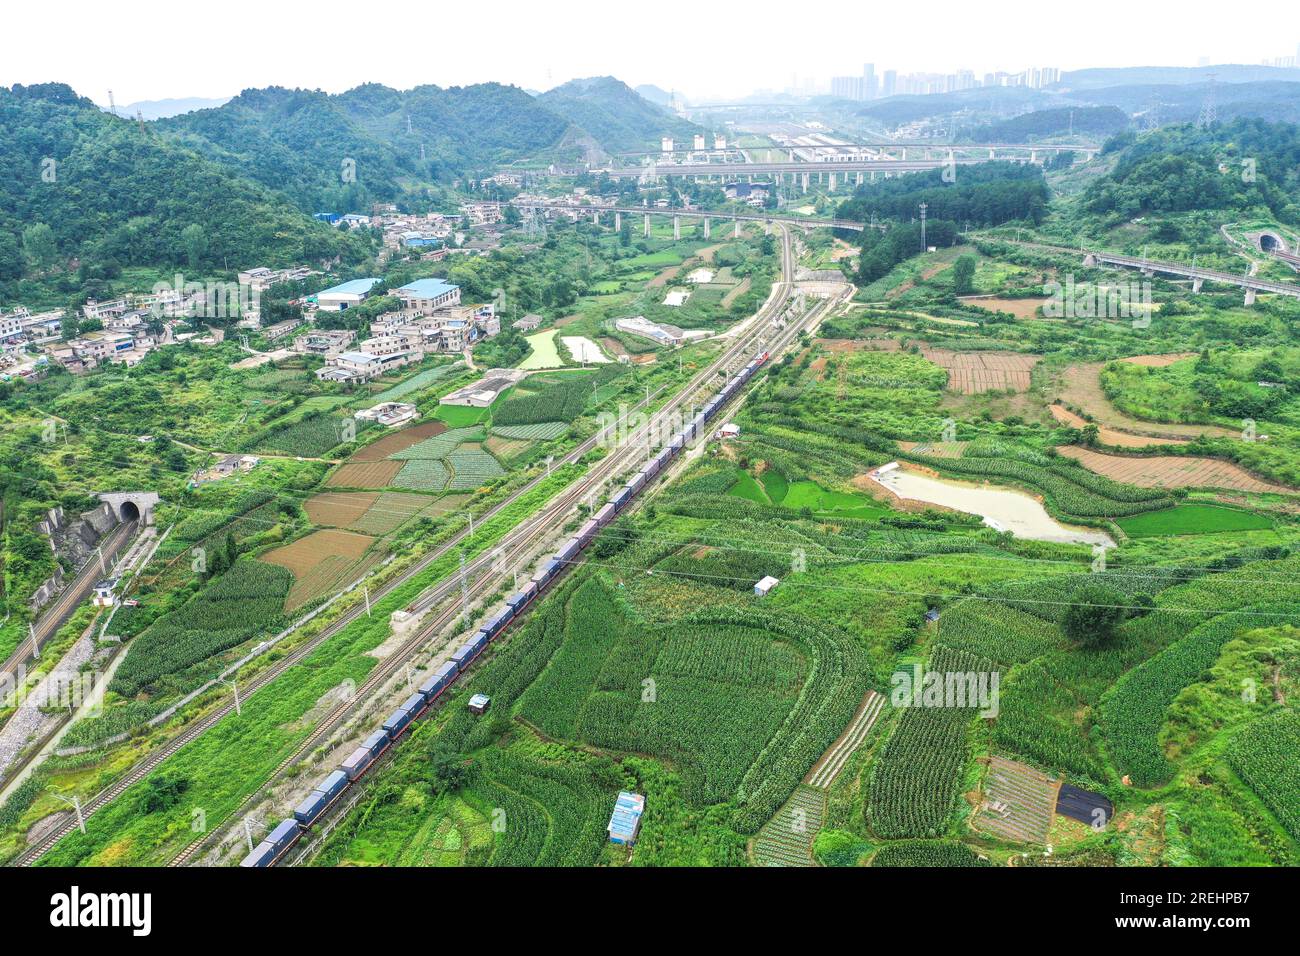 (230728) -- GUIYANG, July 28, 2023 (Xinhua) -- This aerial photo taken on July 28, 2023 shows the first direct China-Central Asia freight train from Dulaying international land-sea logistics port leaving Dulaying Station in Guiyang, southwest China's Guizhou Province. A cargo train left Dulaying international land-sea logistics port on Friday for Almaty of Kazakhstan, marking the launch of the first direct China-Central Asia rail-road intermodal freight train service from Guiyang. About 1,300 tonnes of agricultural products will be transported from Kazakhstan to Guiyang on the return journe Stock Photo